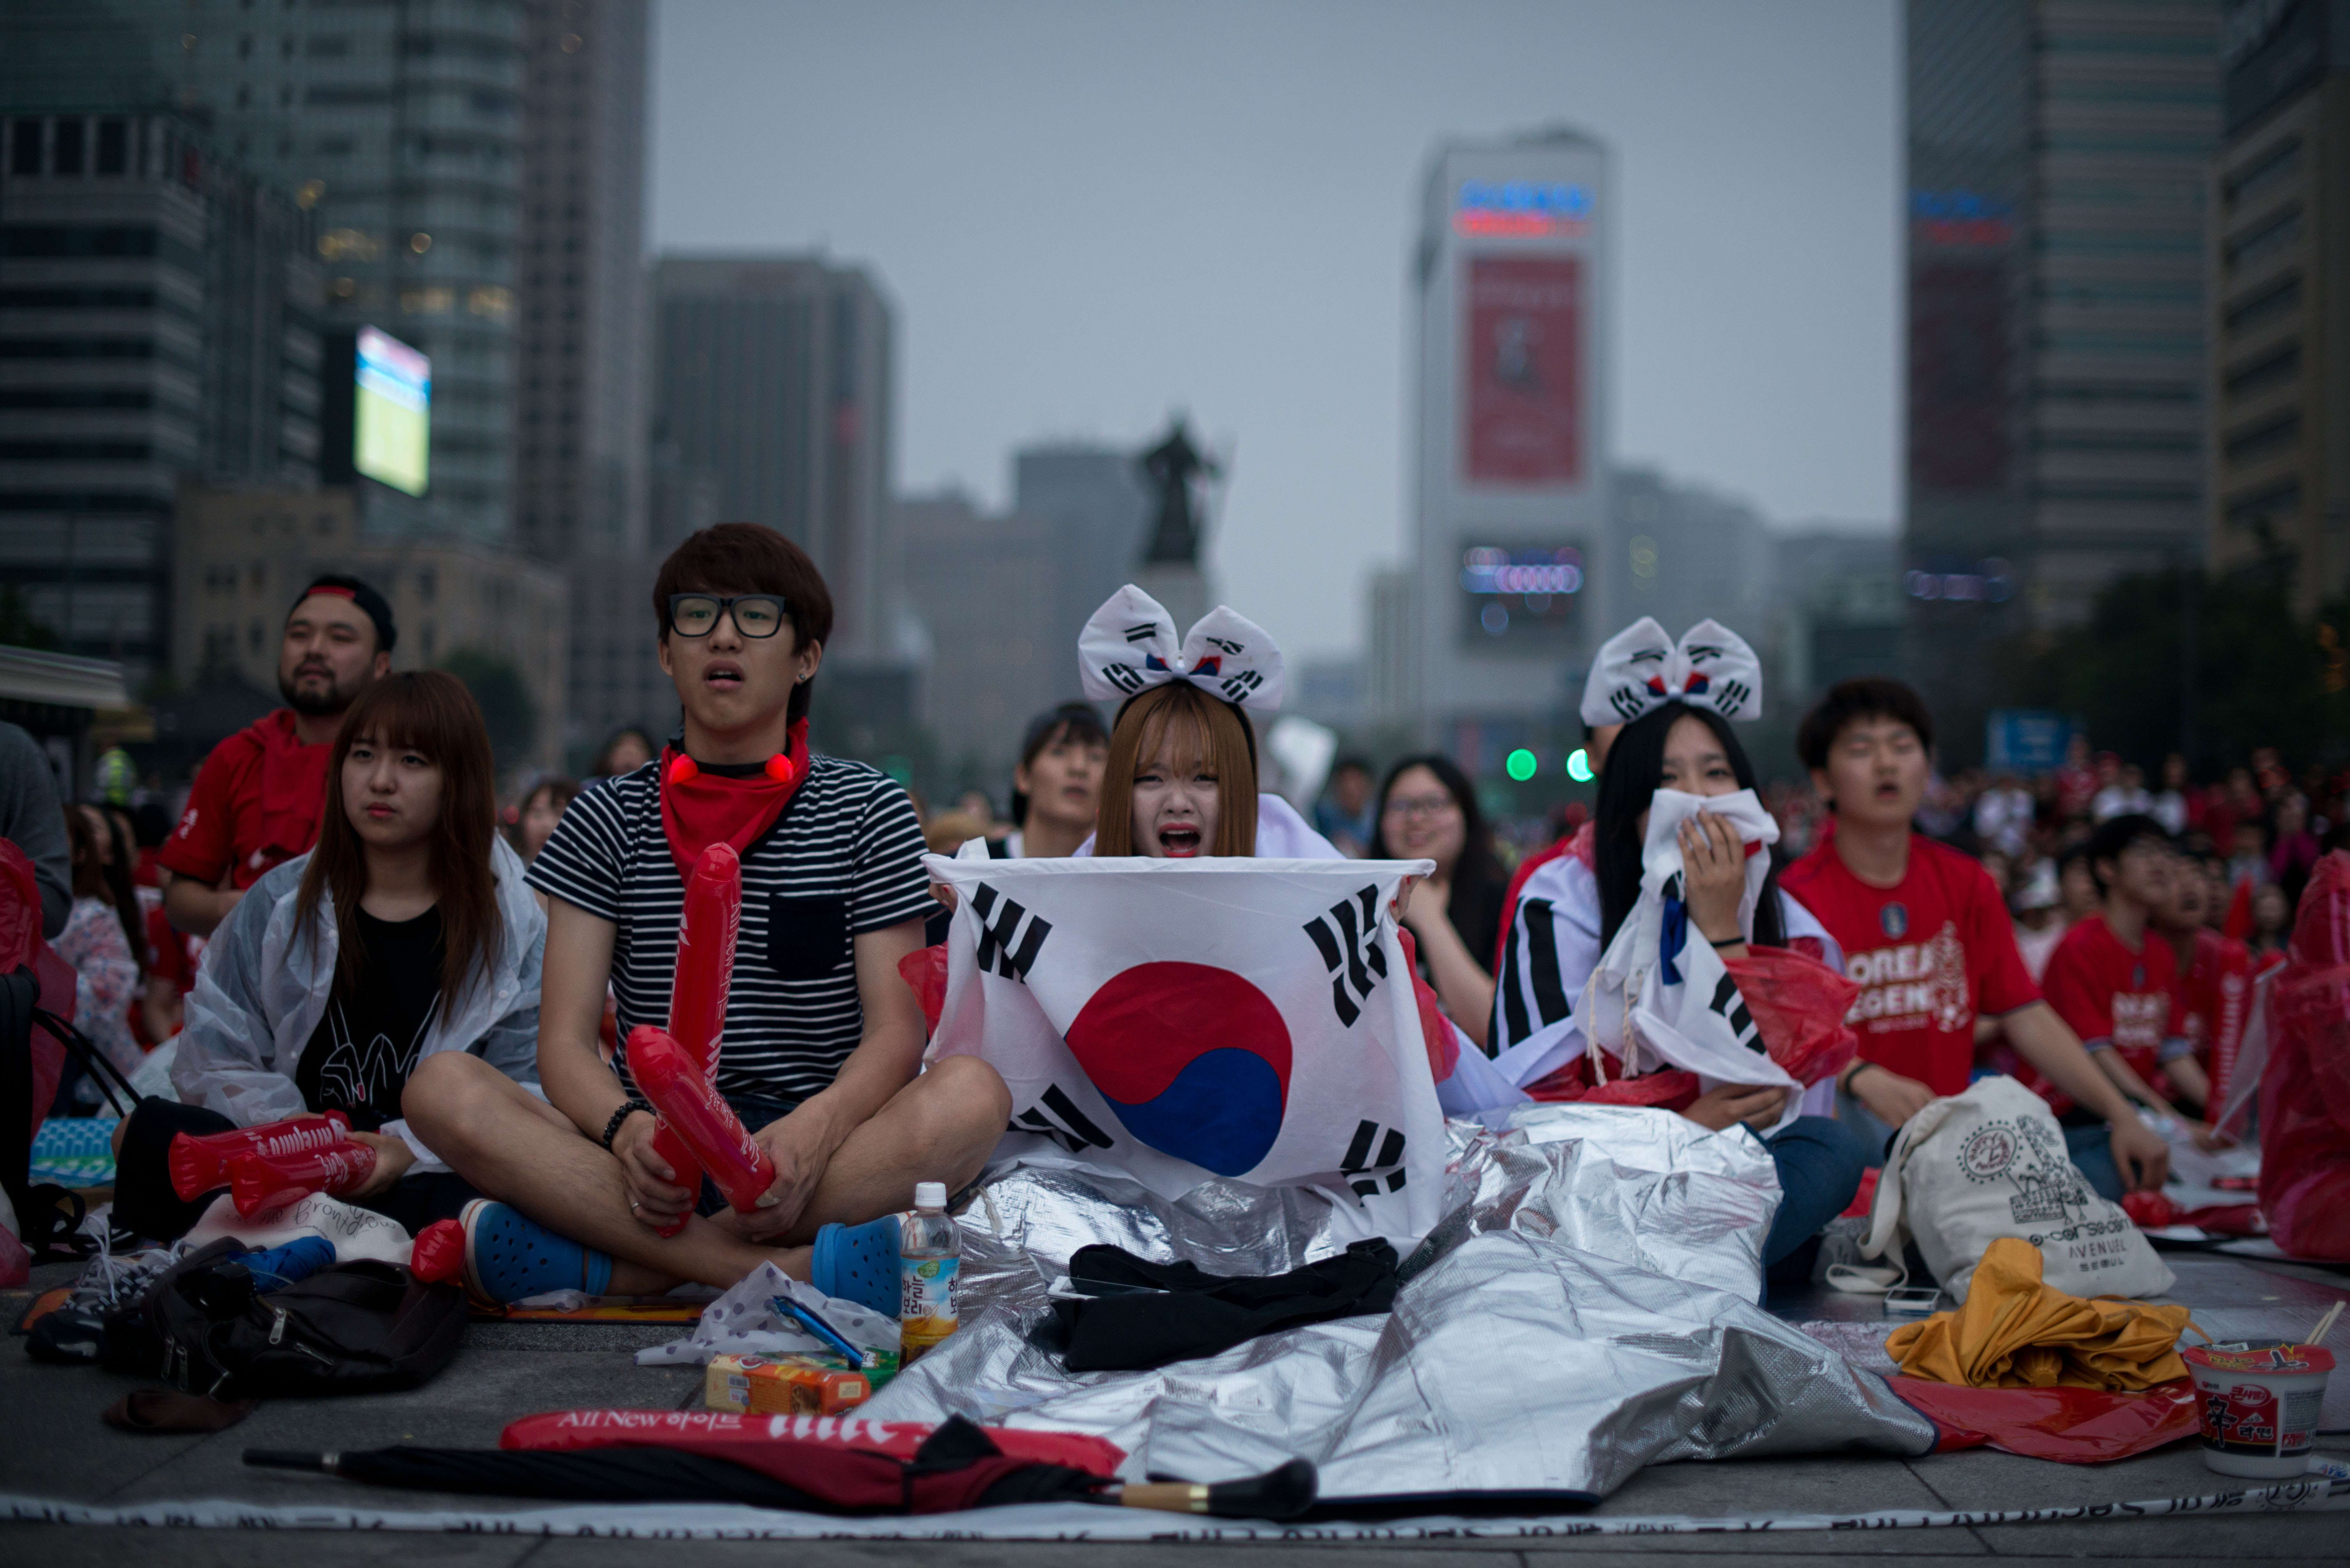 South Korean football fans react as their team loses to Algeria as they watch the match on giant screens in central Seoul on June 23, 2014.